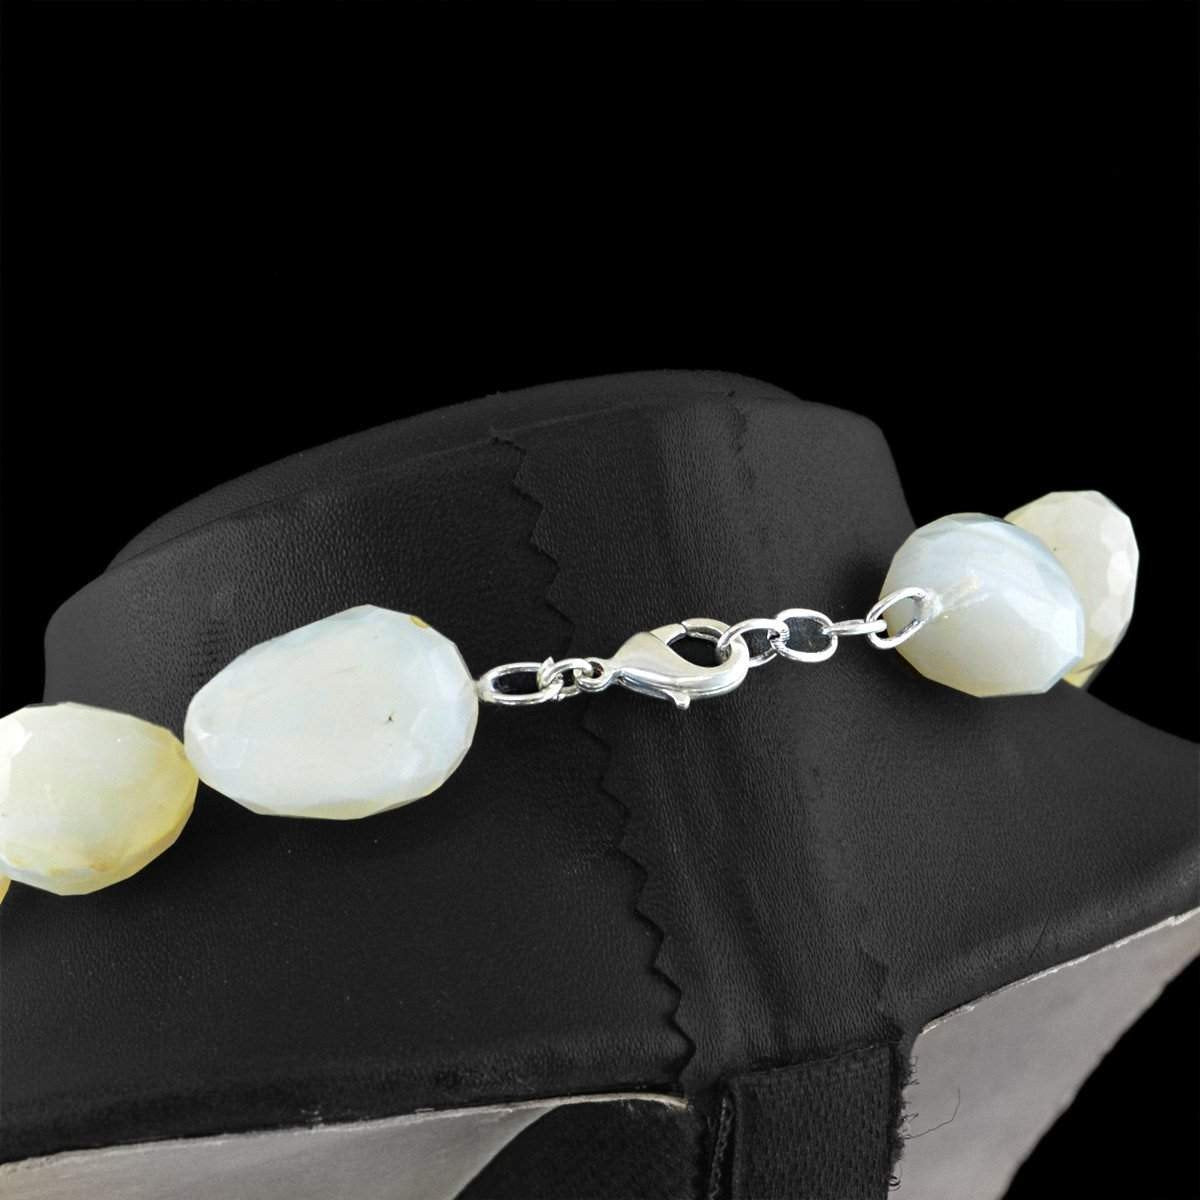 gemsmore:Natural White Agate Necklace Faceted Huge Beads - Single Strand